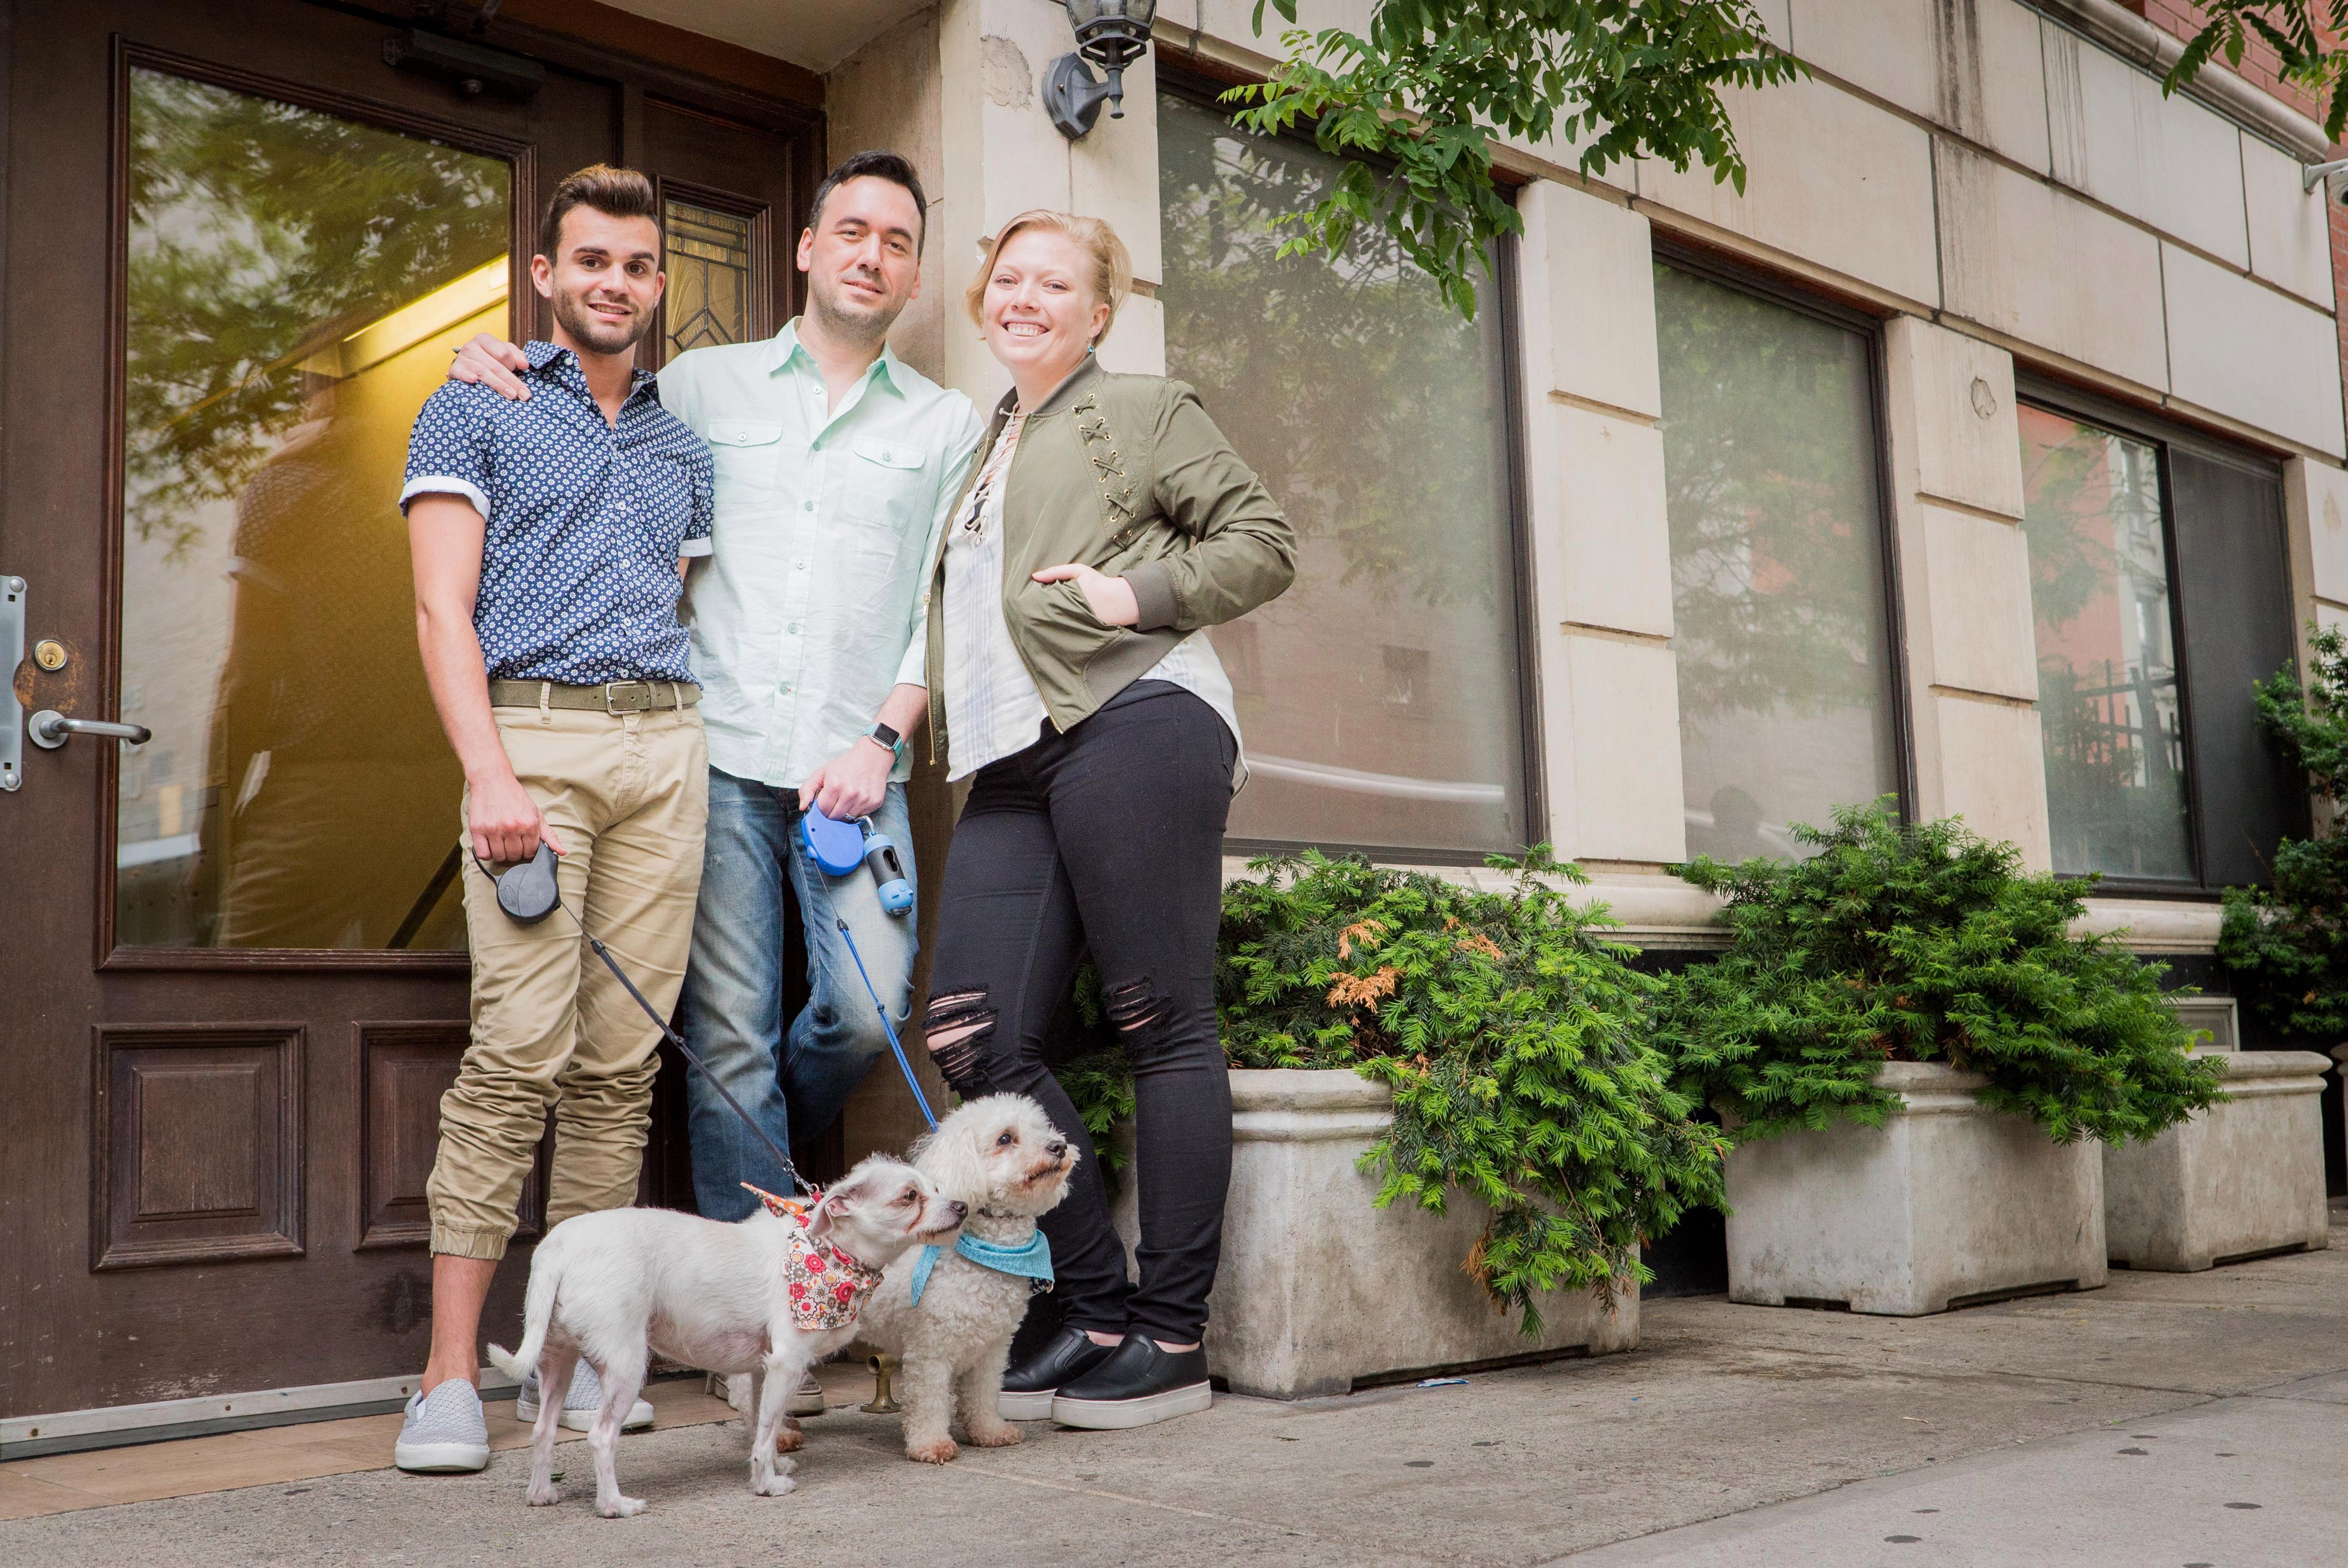  The 'throuple' (L-R Matt, Chris and Cait) outside the apartment they share with their two dogs